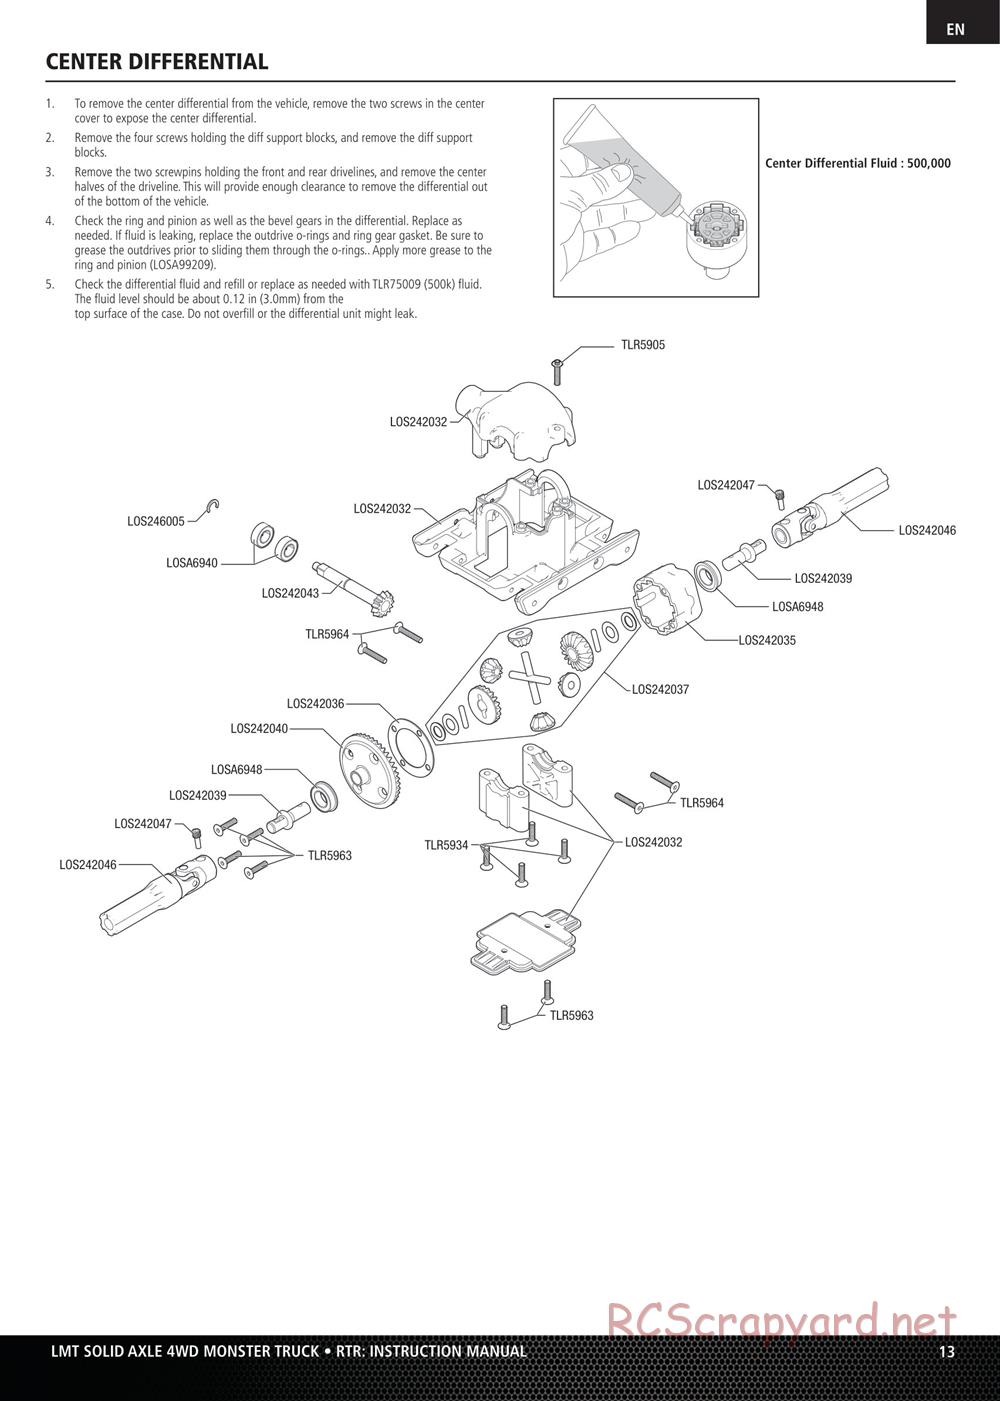 Team Losi - LMT Solid Axle Roller - Manual - Page 13